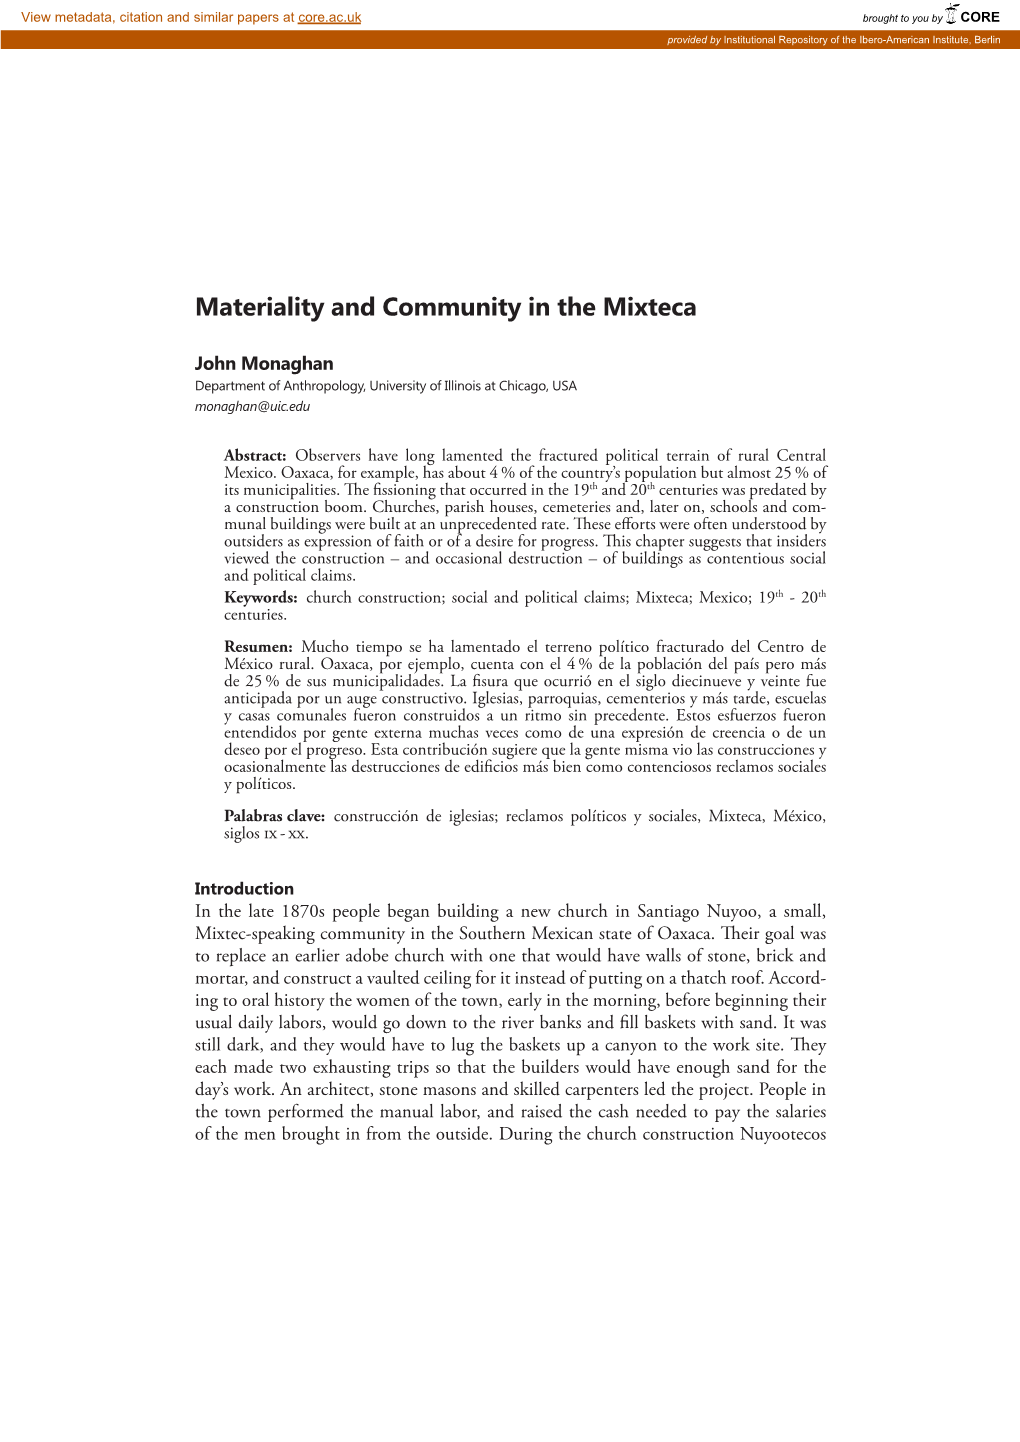 Materiality and Community in the Mixteca